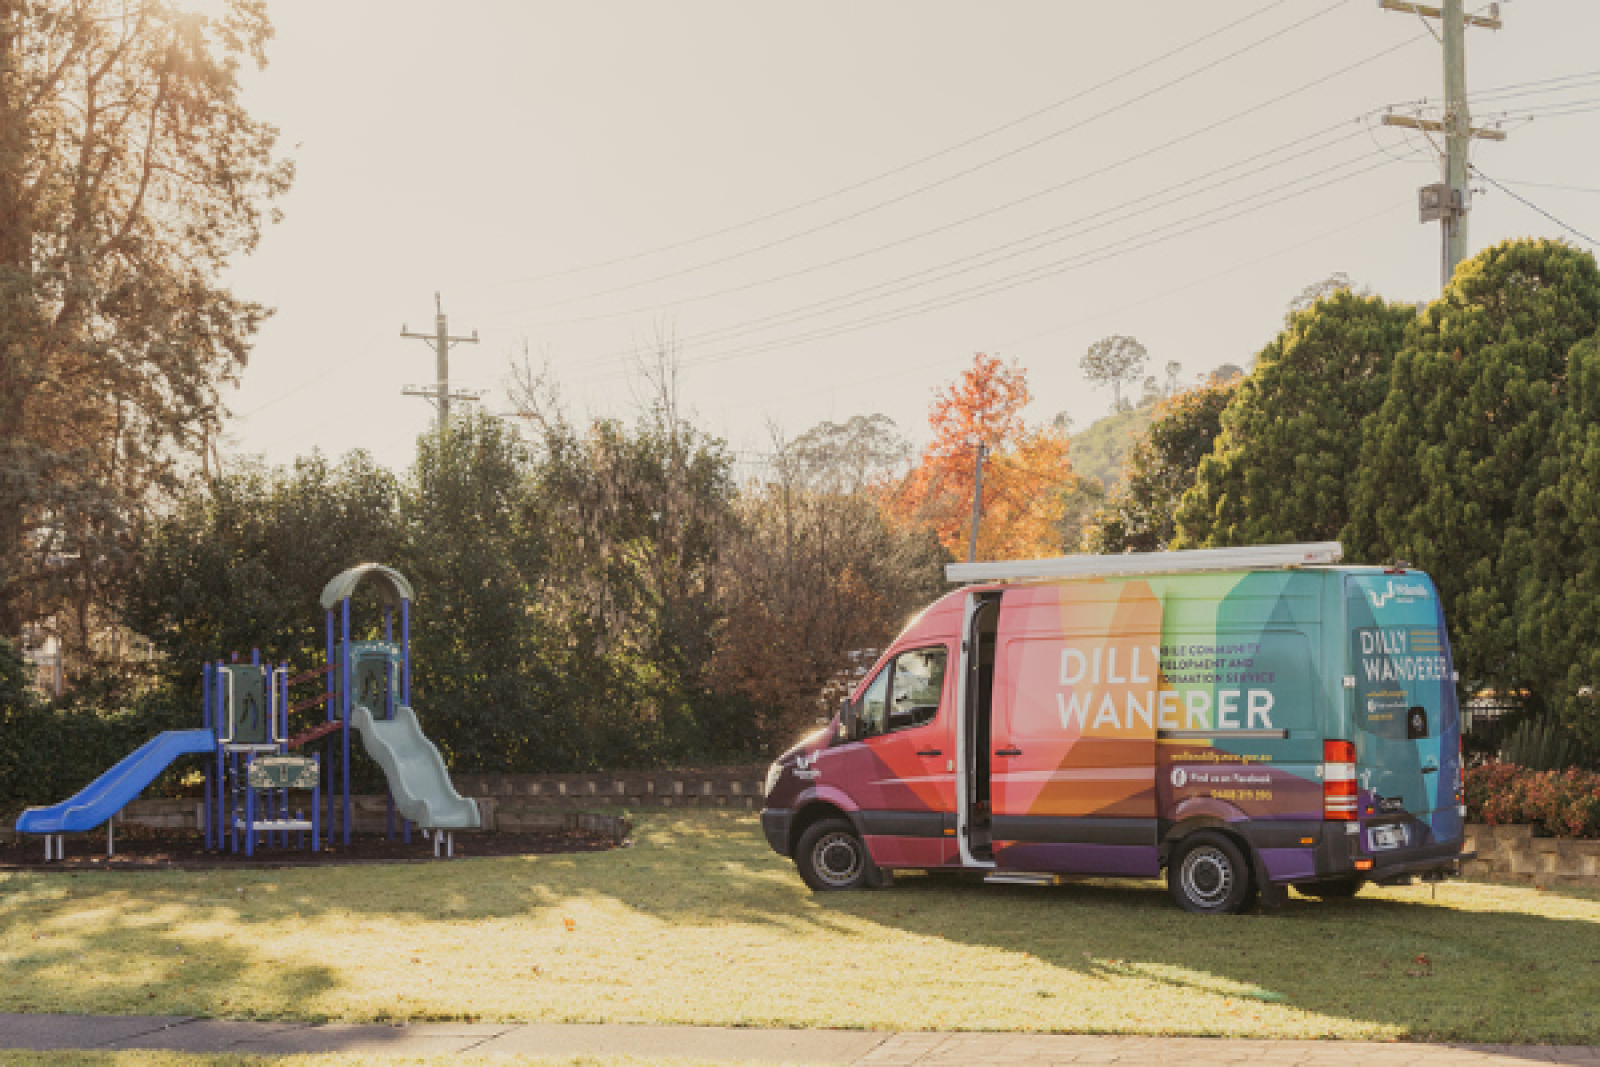 Dilly Wanderer van parked in a park